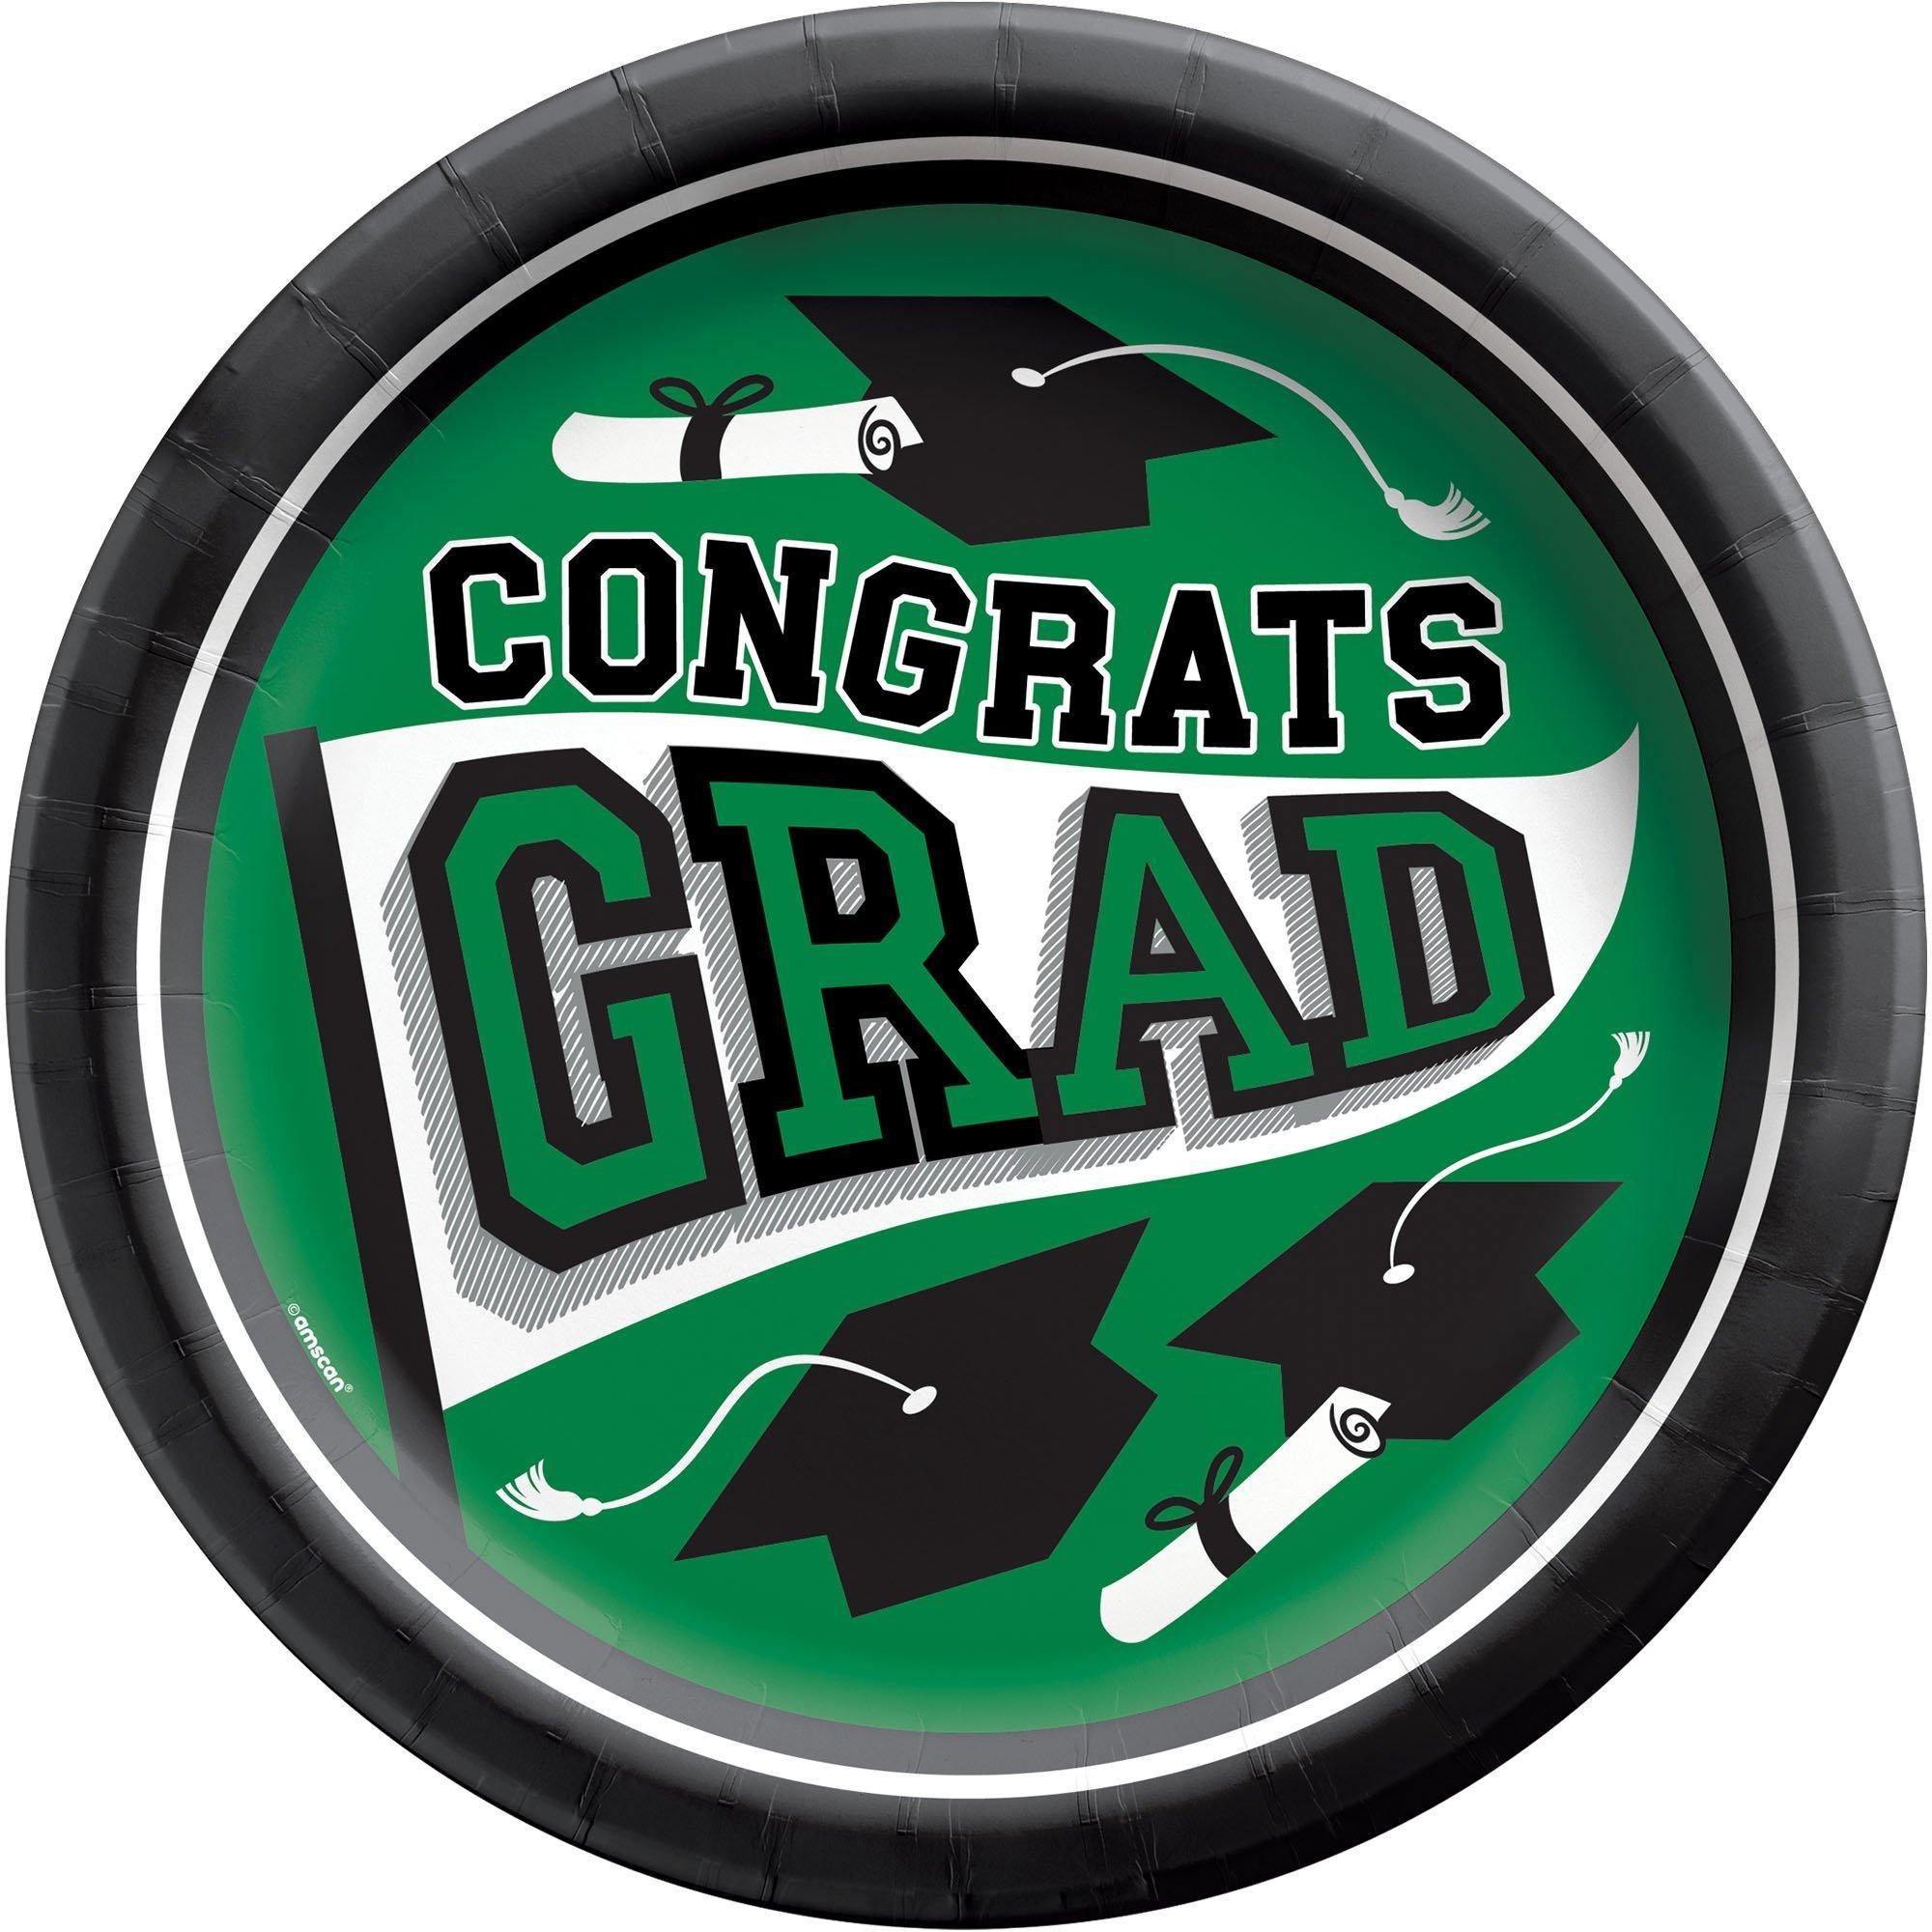 Graduation Party Supplies Kit for 60 with Decorations, Banners, Plates, Napkins, Cups - Green Congrats Grad